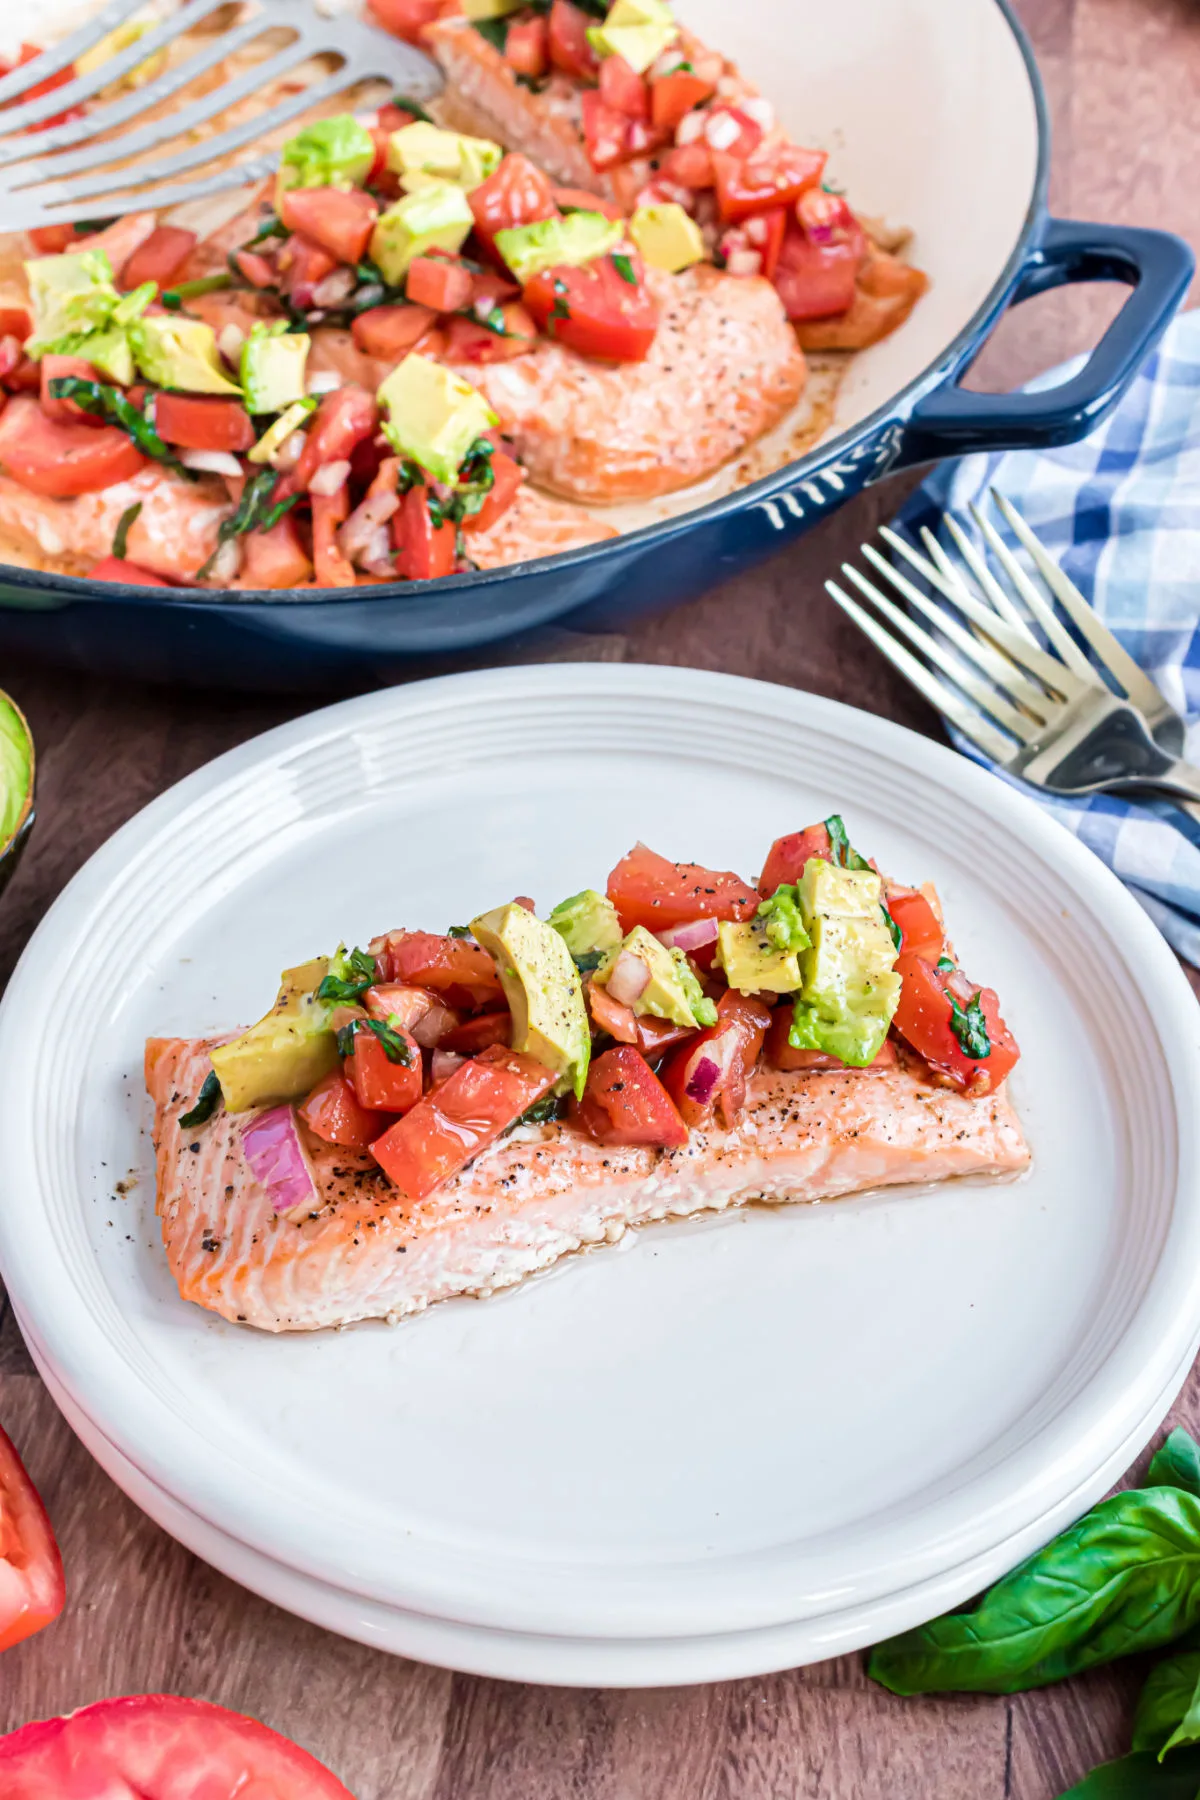 Salmon filet topped with bruschetta and avocado on a white dinner plate.